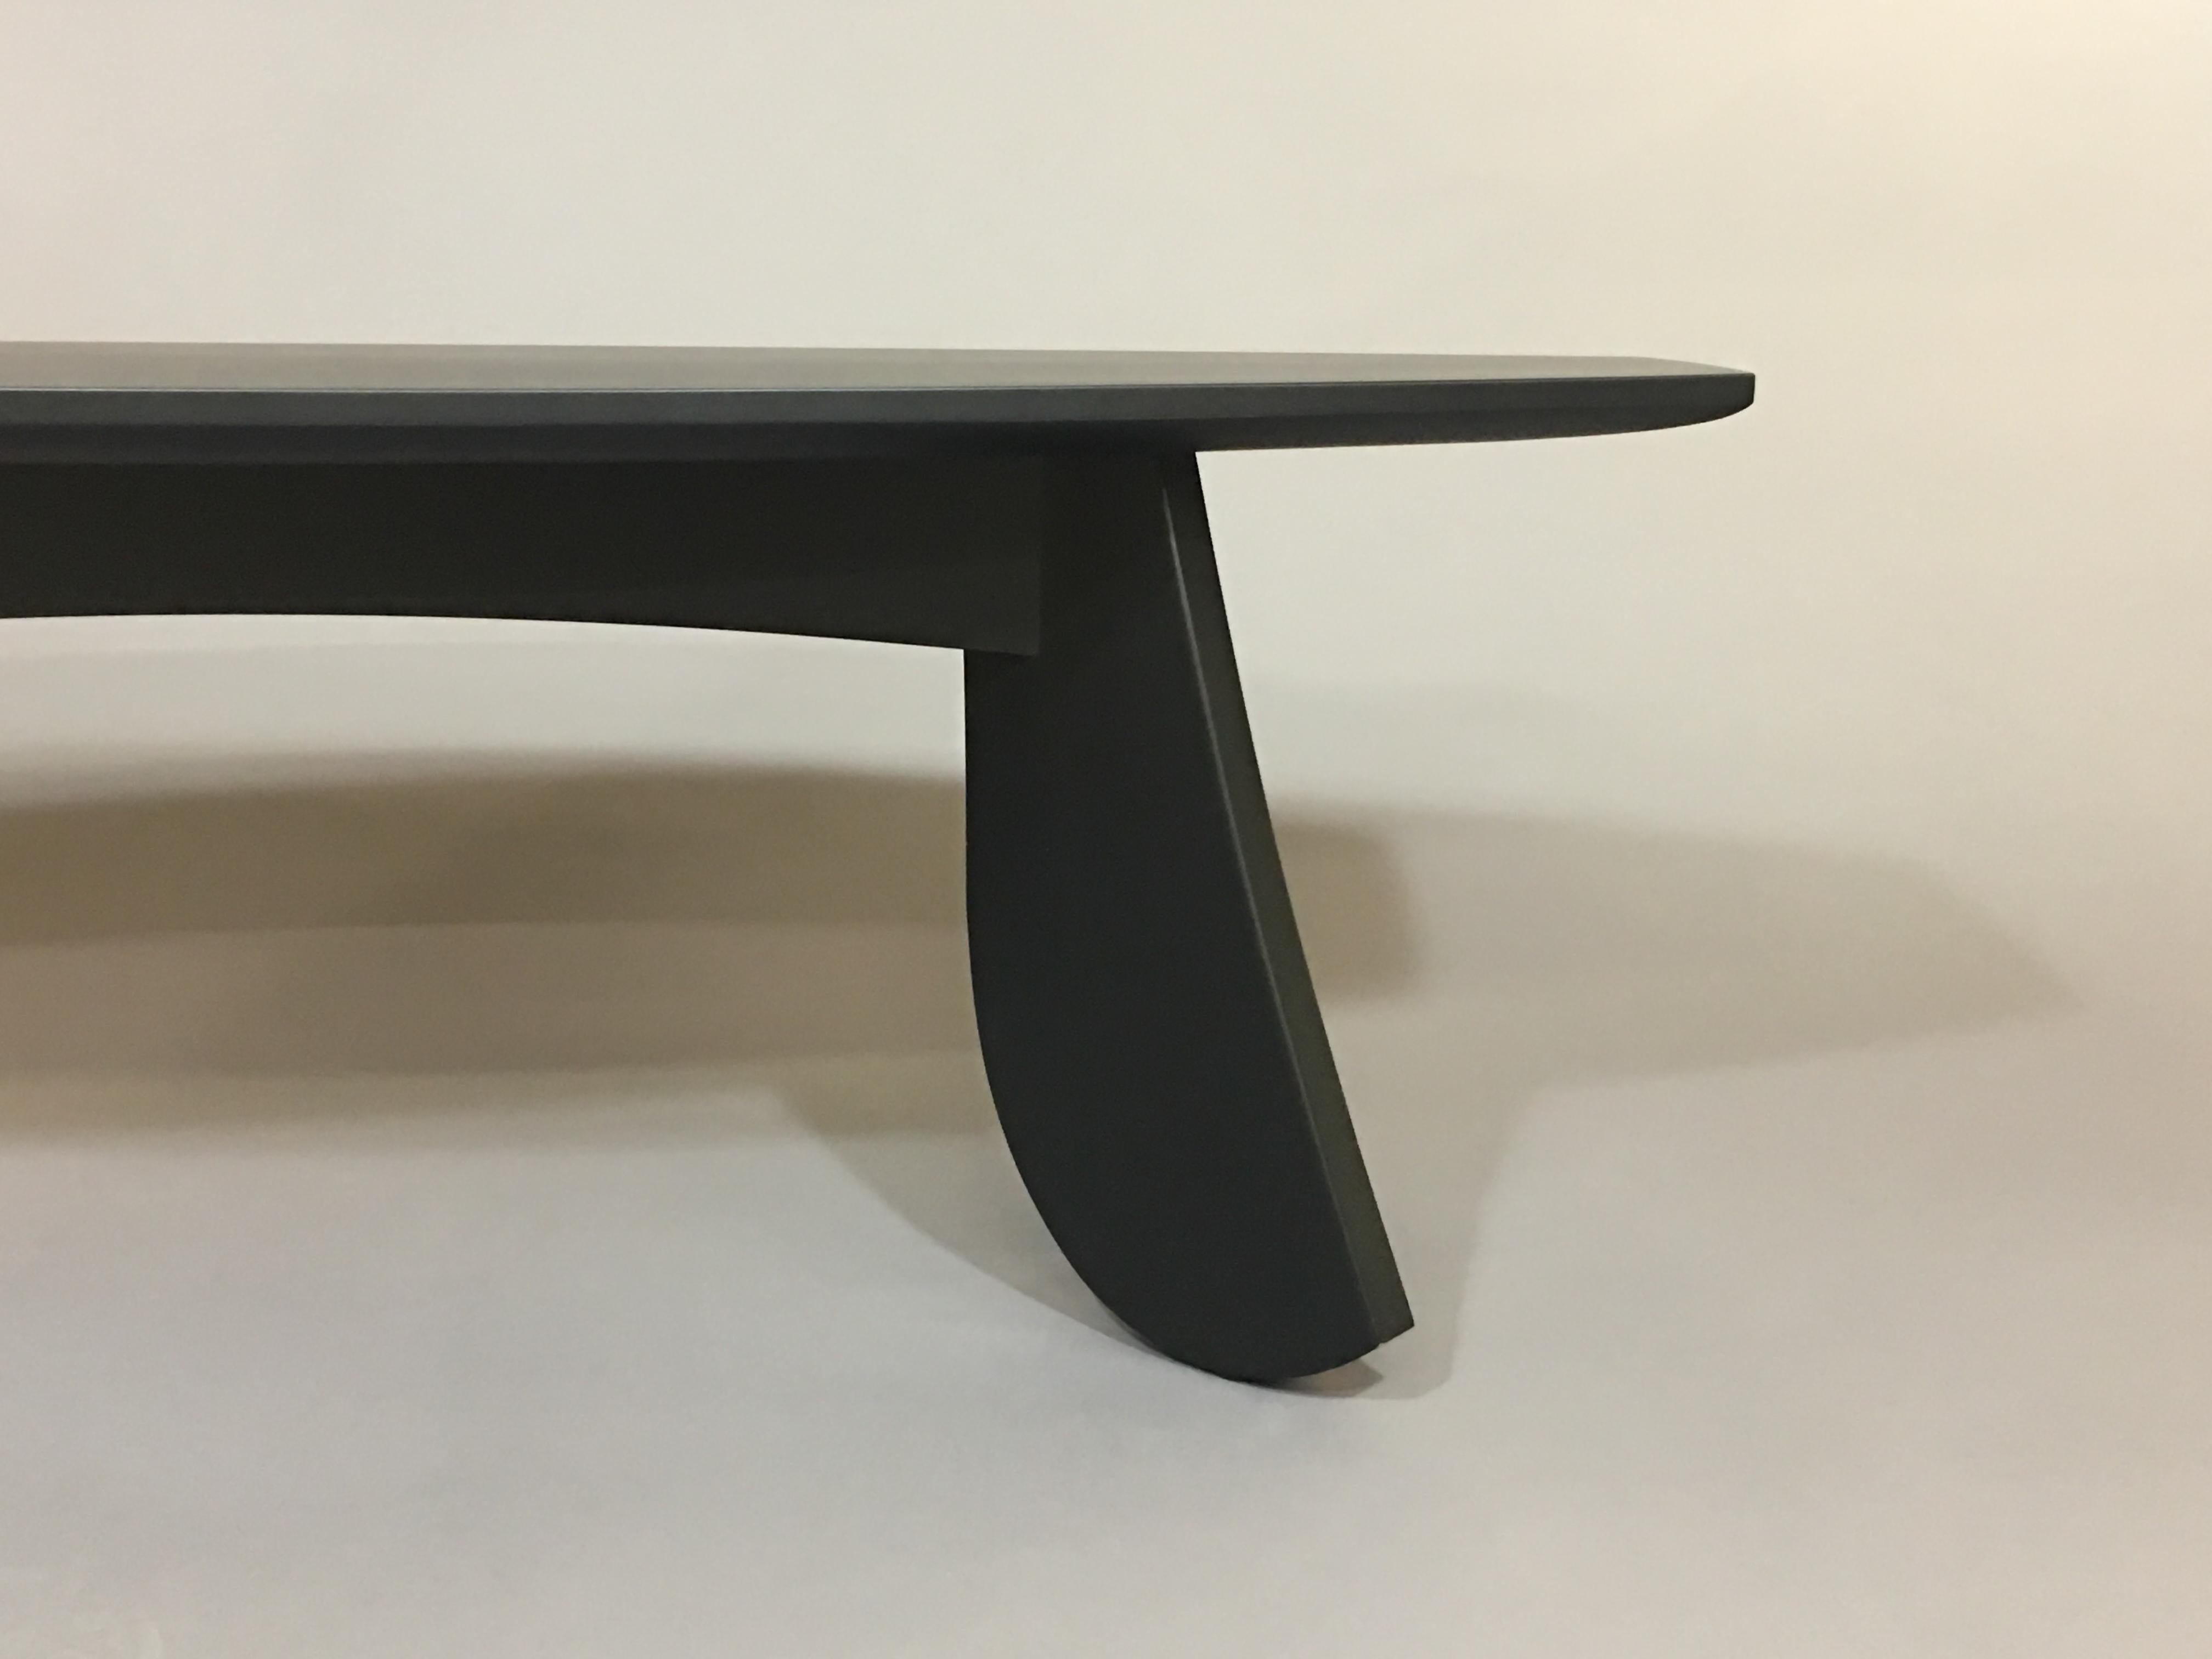 Elongated designed table/bench. Made from solid cherry with a pure pigmented black primer, finished with a clear coat of conversion varnish. Legs constructed using mortise and tenons. The top is hand sculpted on the underside and along the edges.